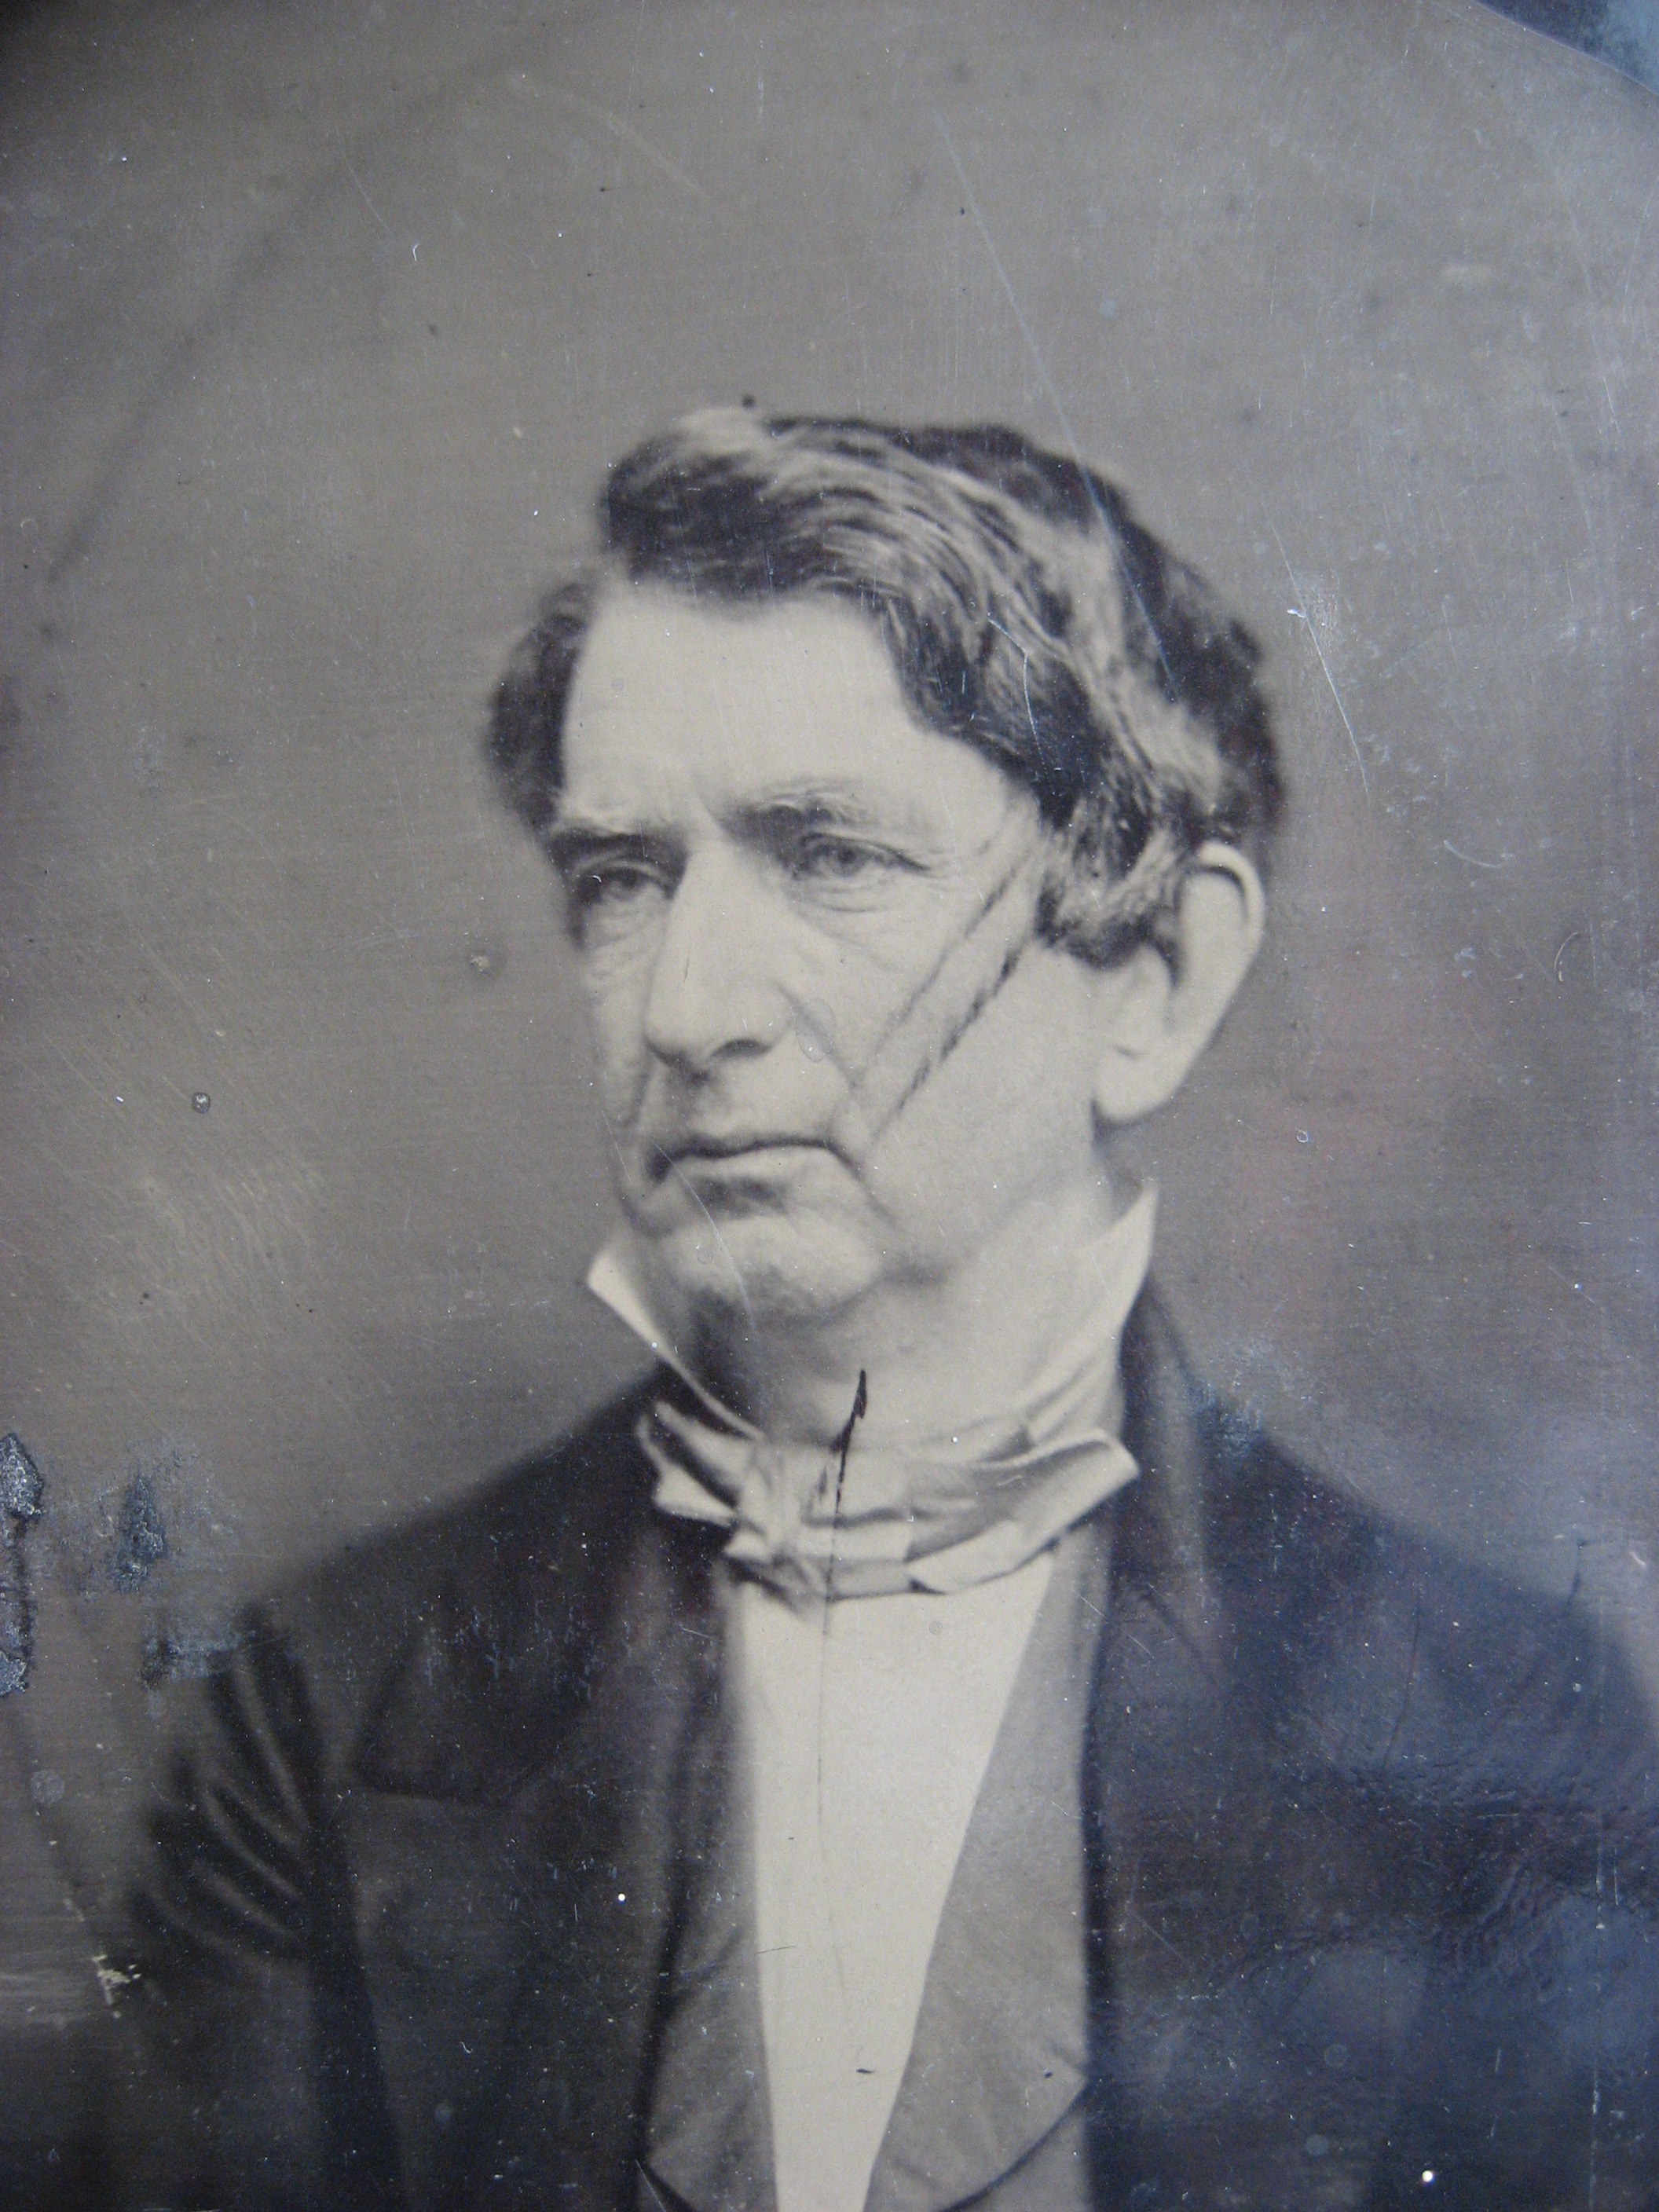 William H. Seward (From the collections of the Seward House Museum - Auburn, N.Y.)